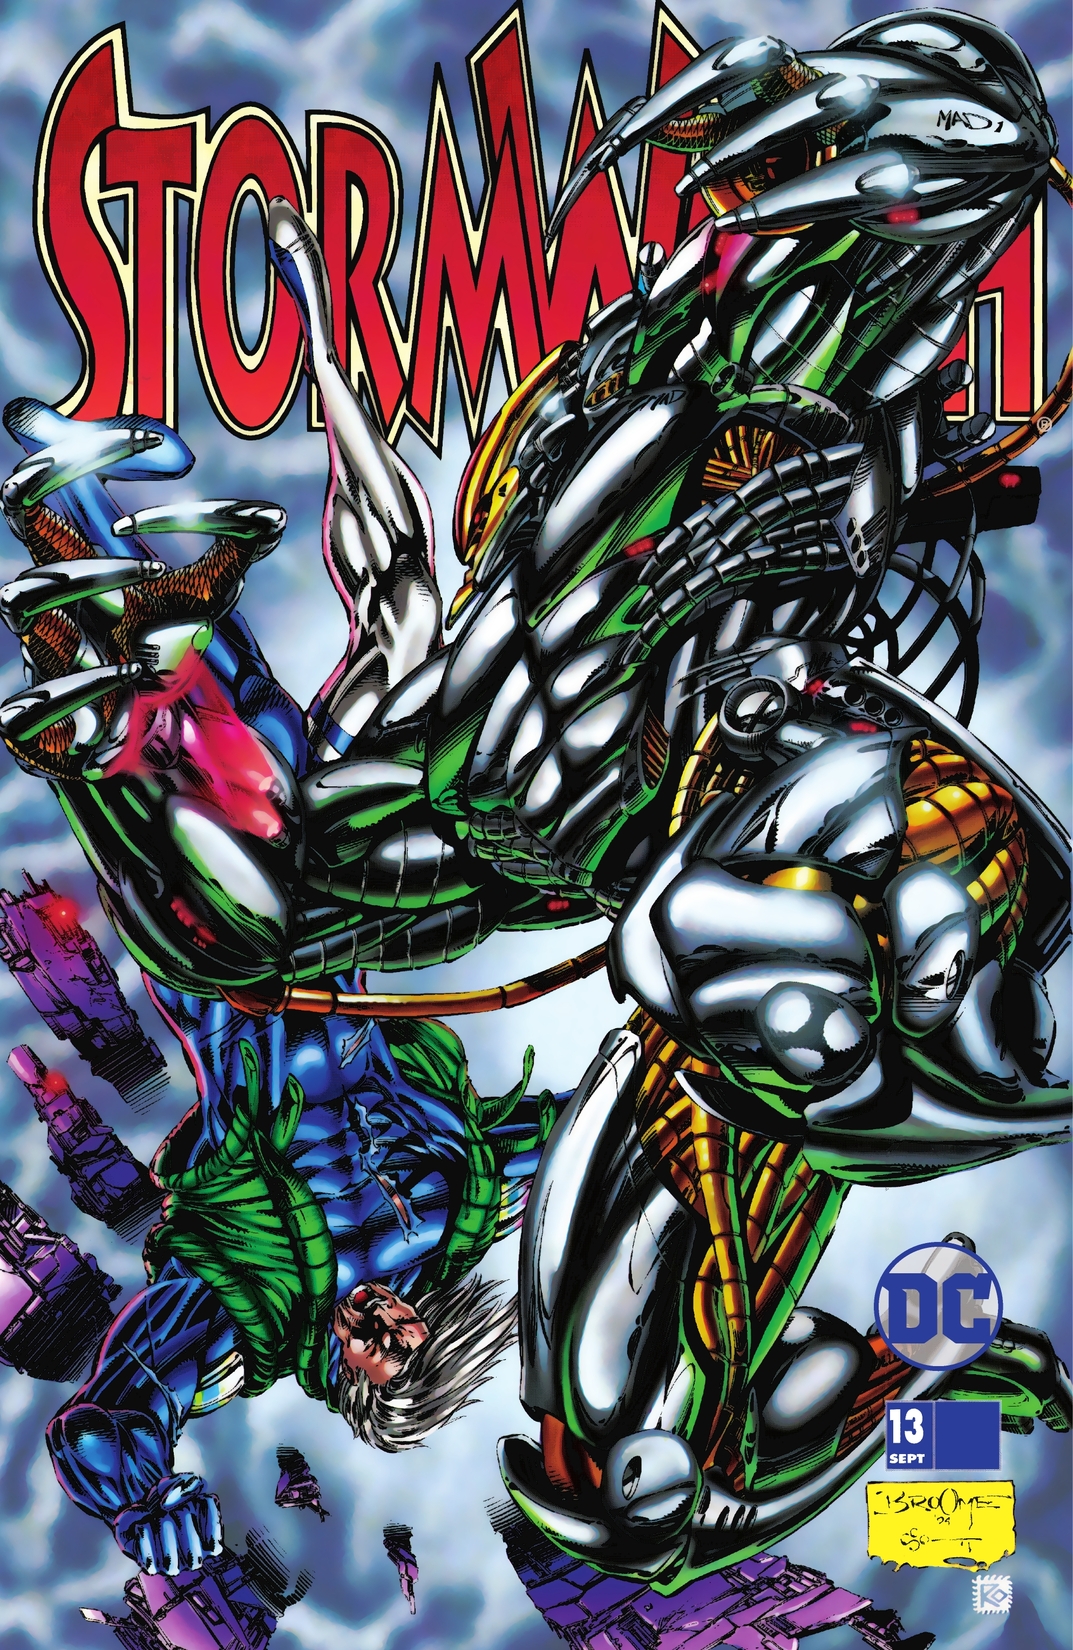 Stormwatch (1993-) #13 preview images